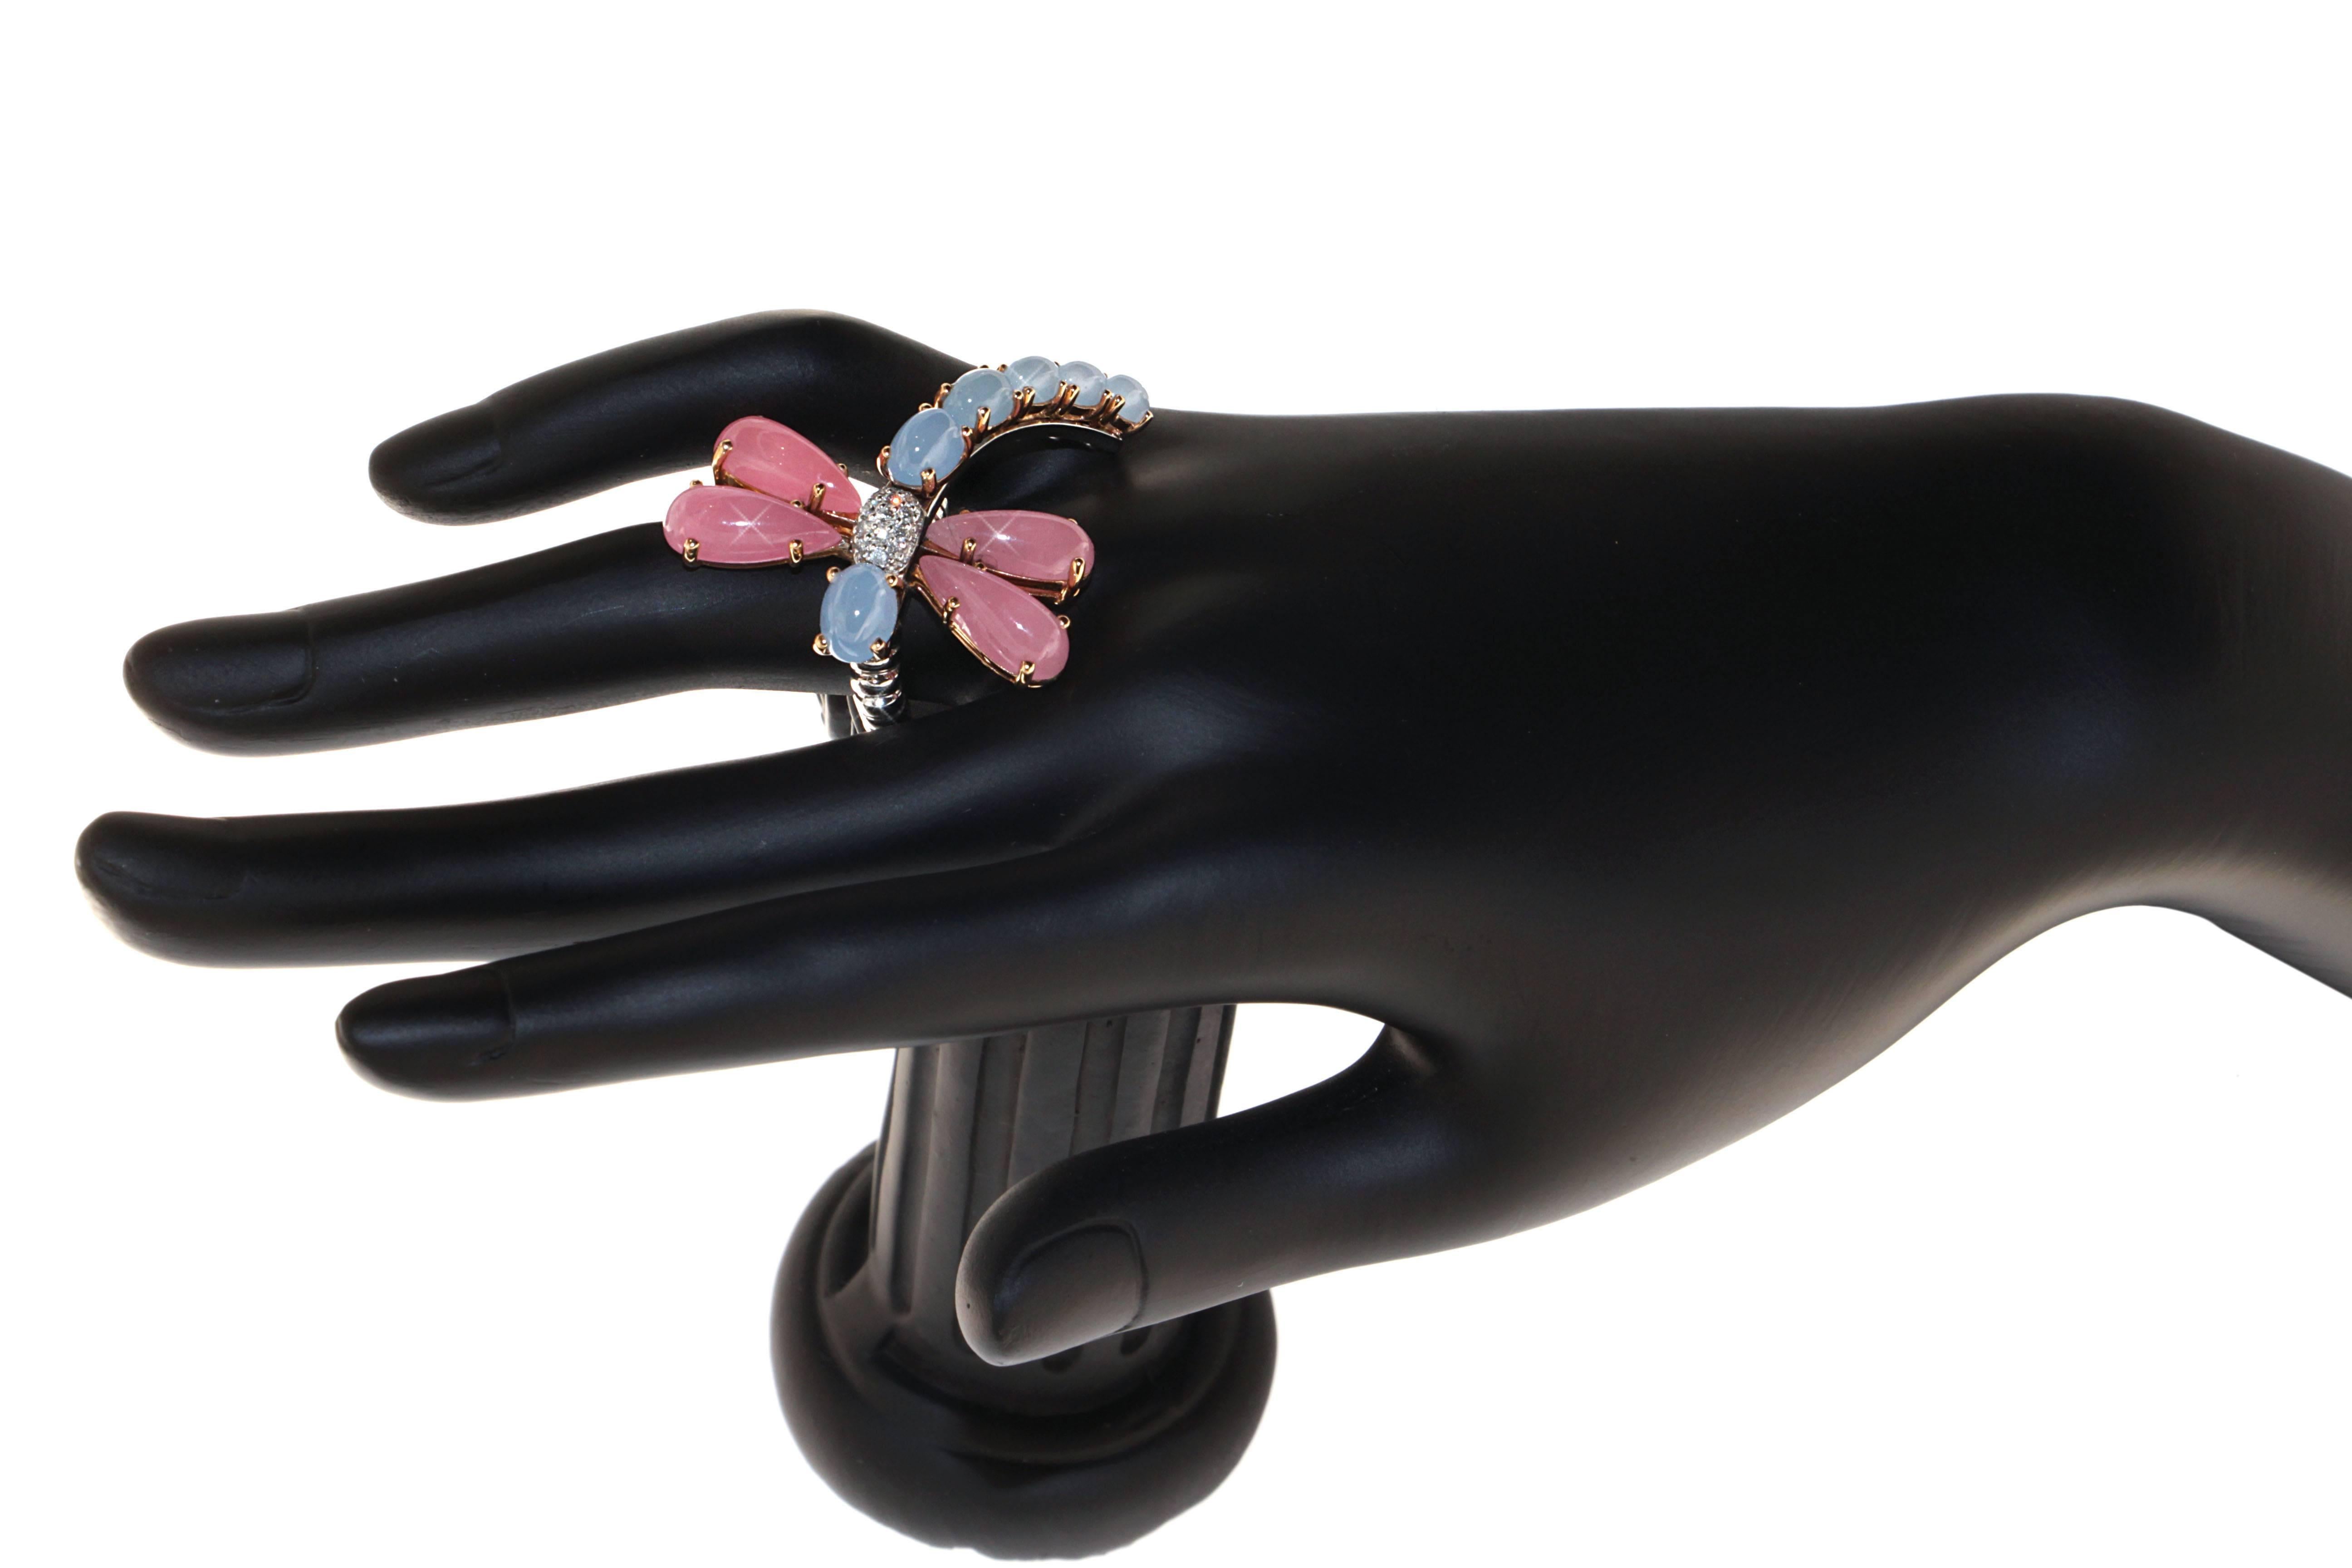 Contemporary Zorab Creation, the Jade and Diamond Pastel Dragonfly Motion Ring